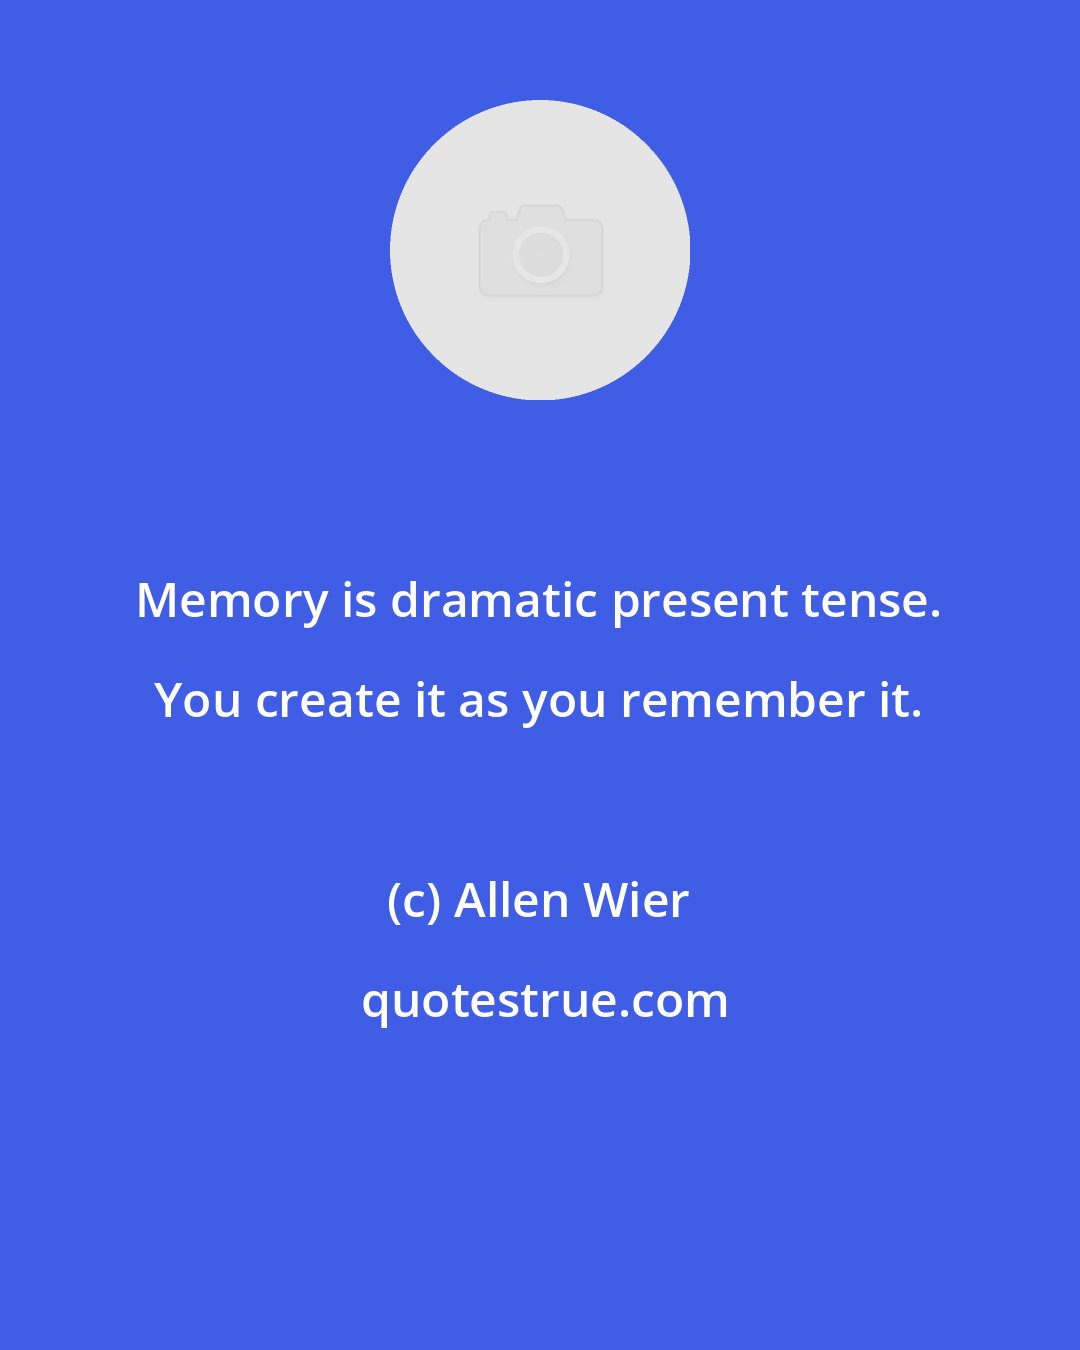 Allen Wier: Memory is dramatic present tense. You create it as you remember it.